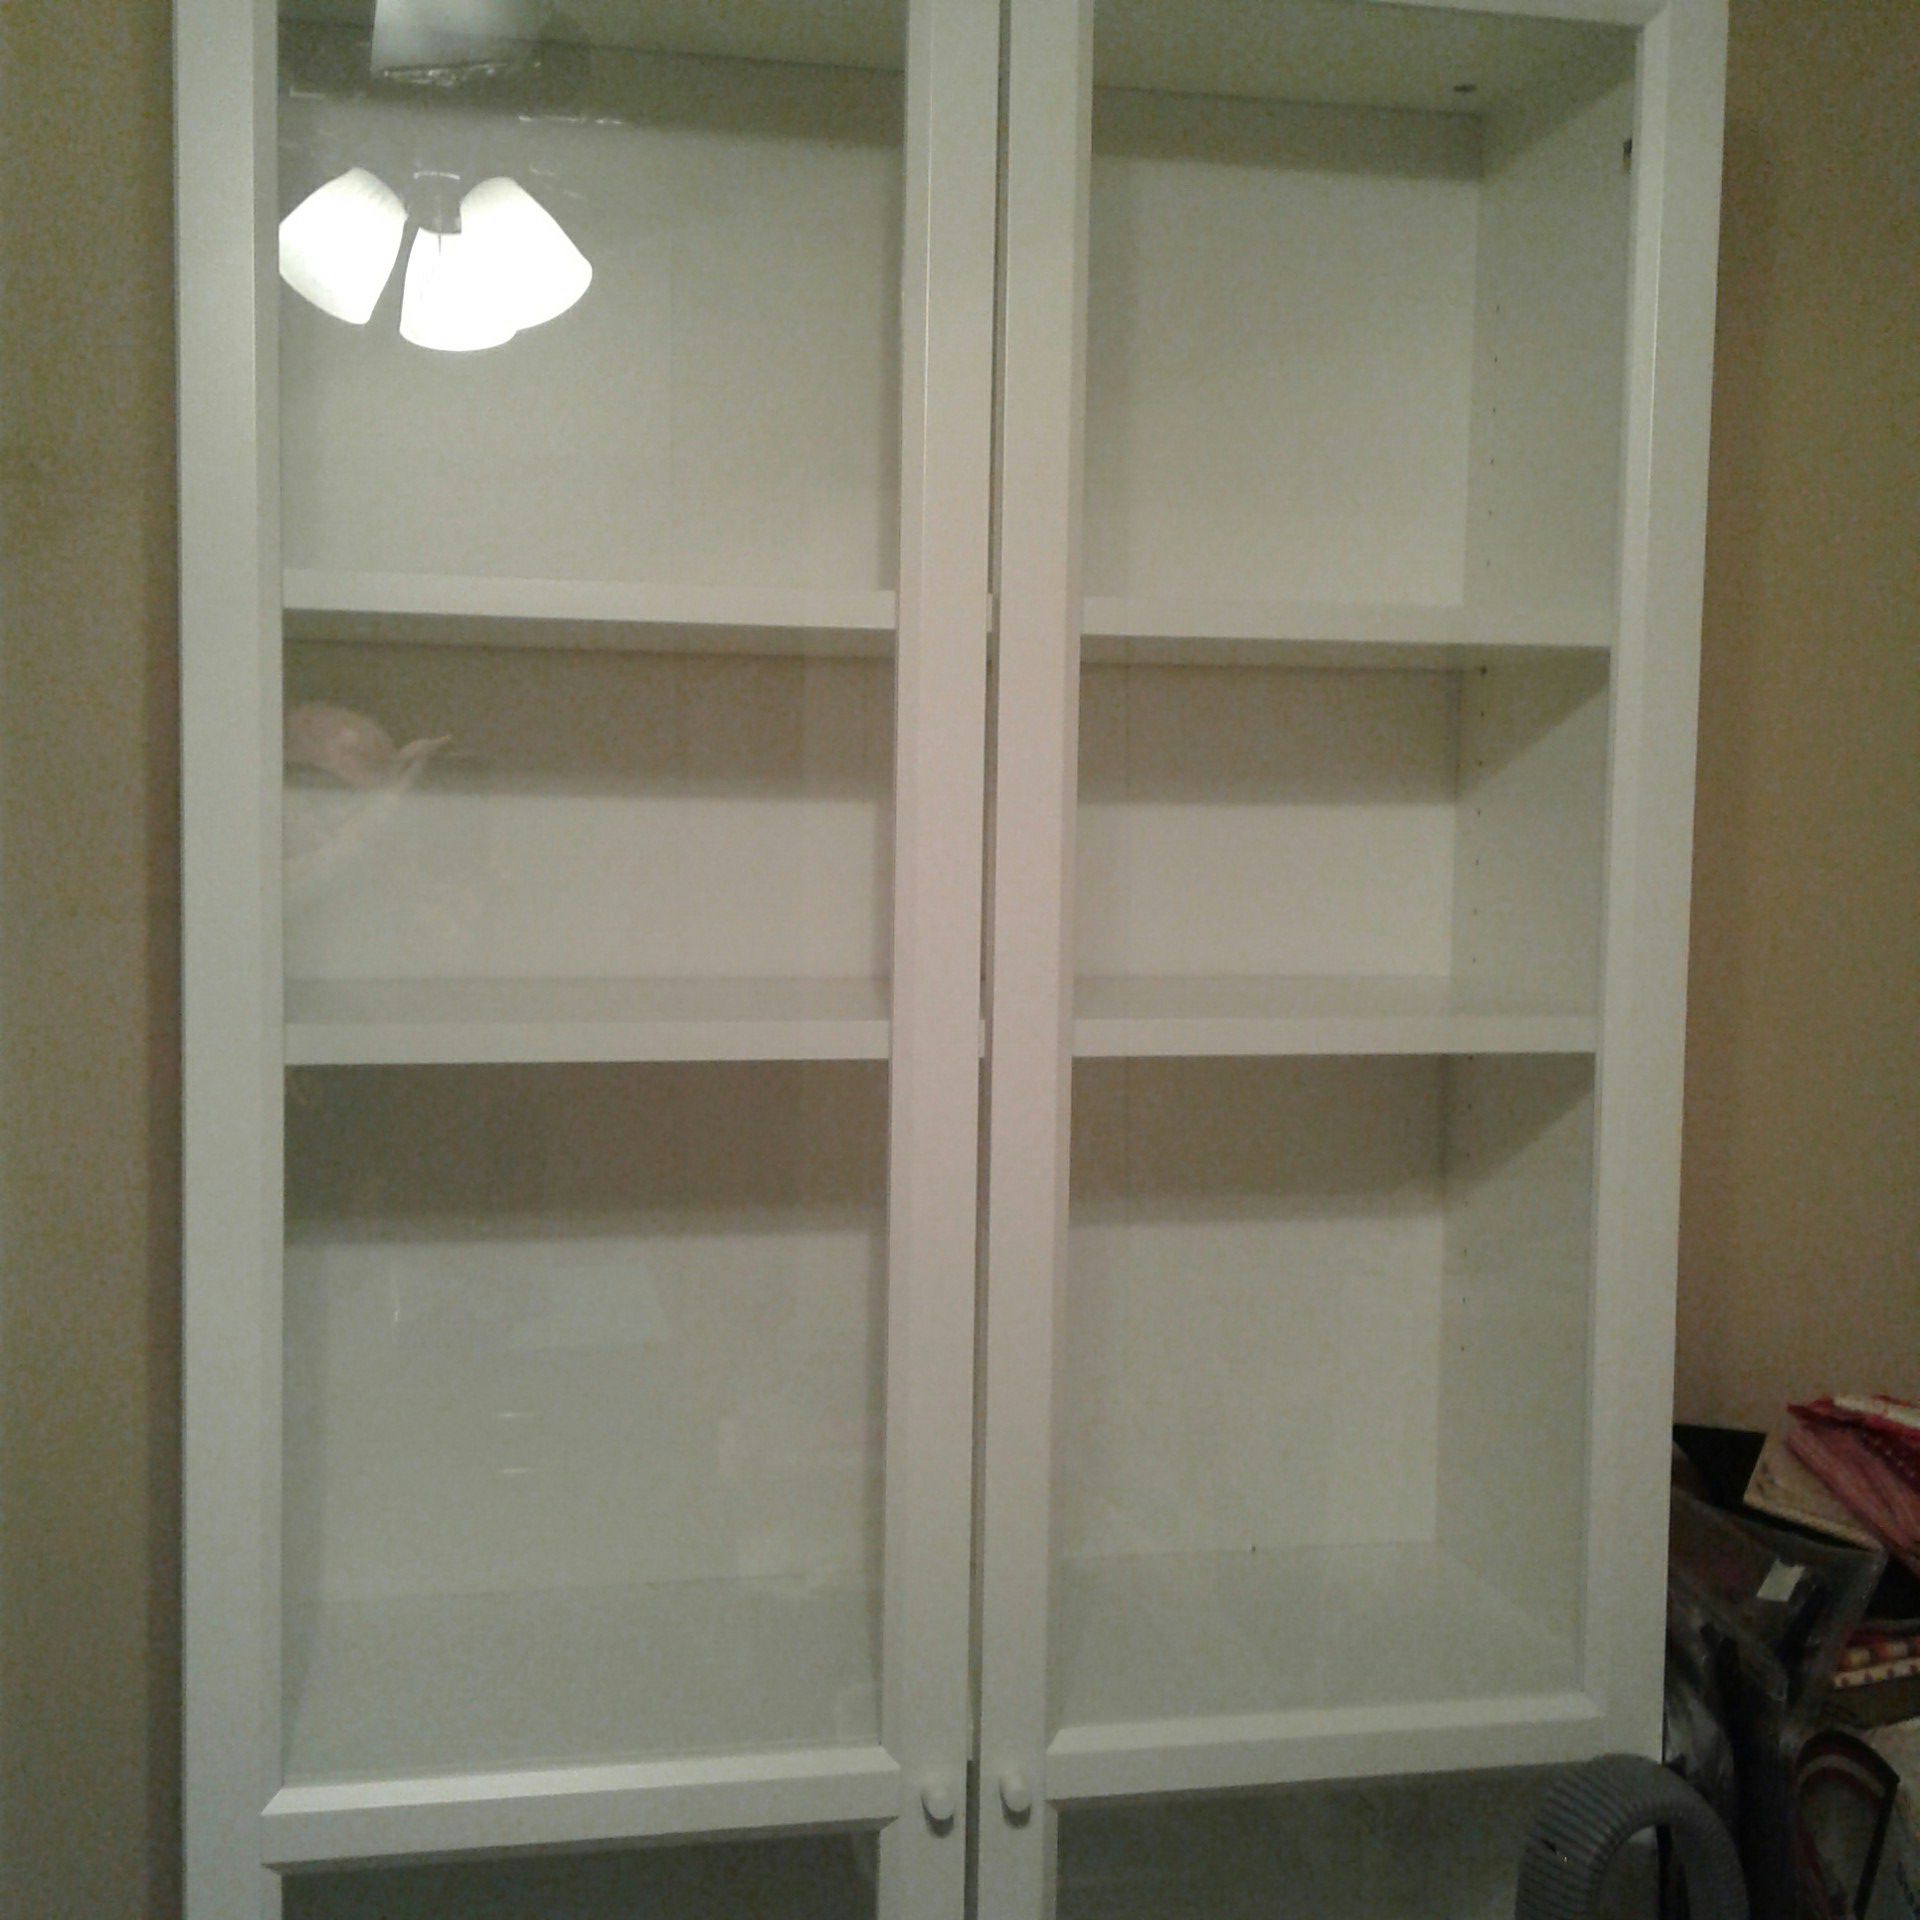 Cabinet w/glass doors. Billy style from Ikea.